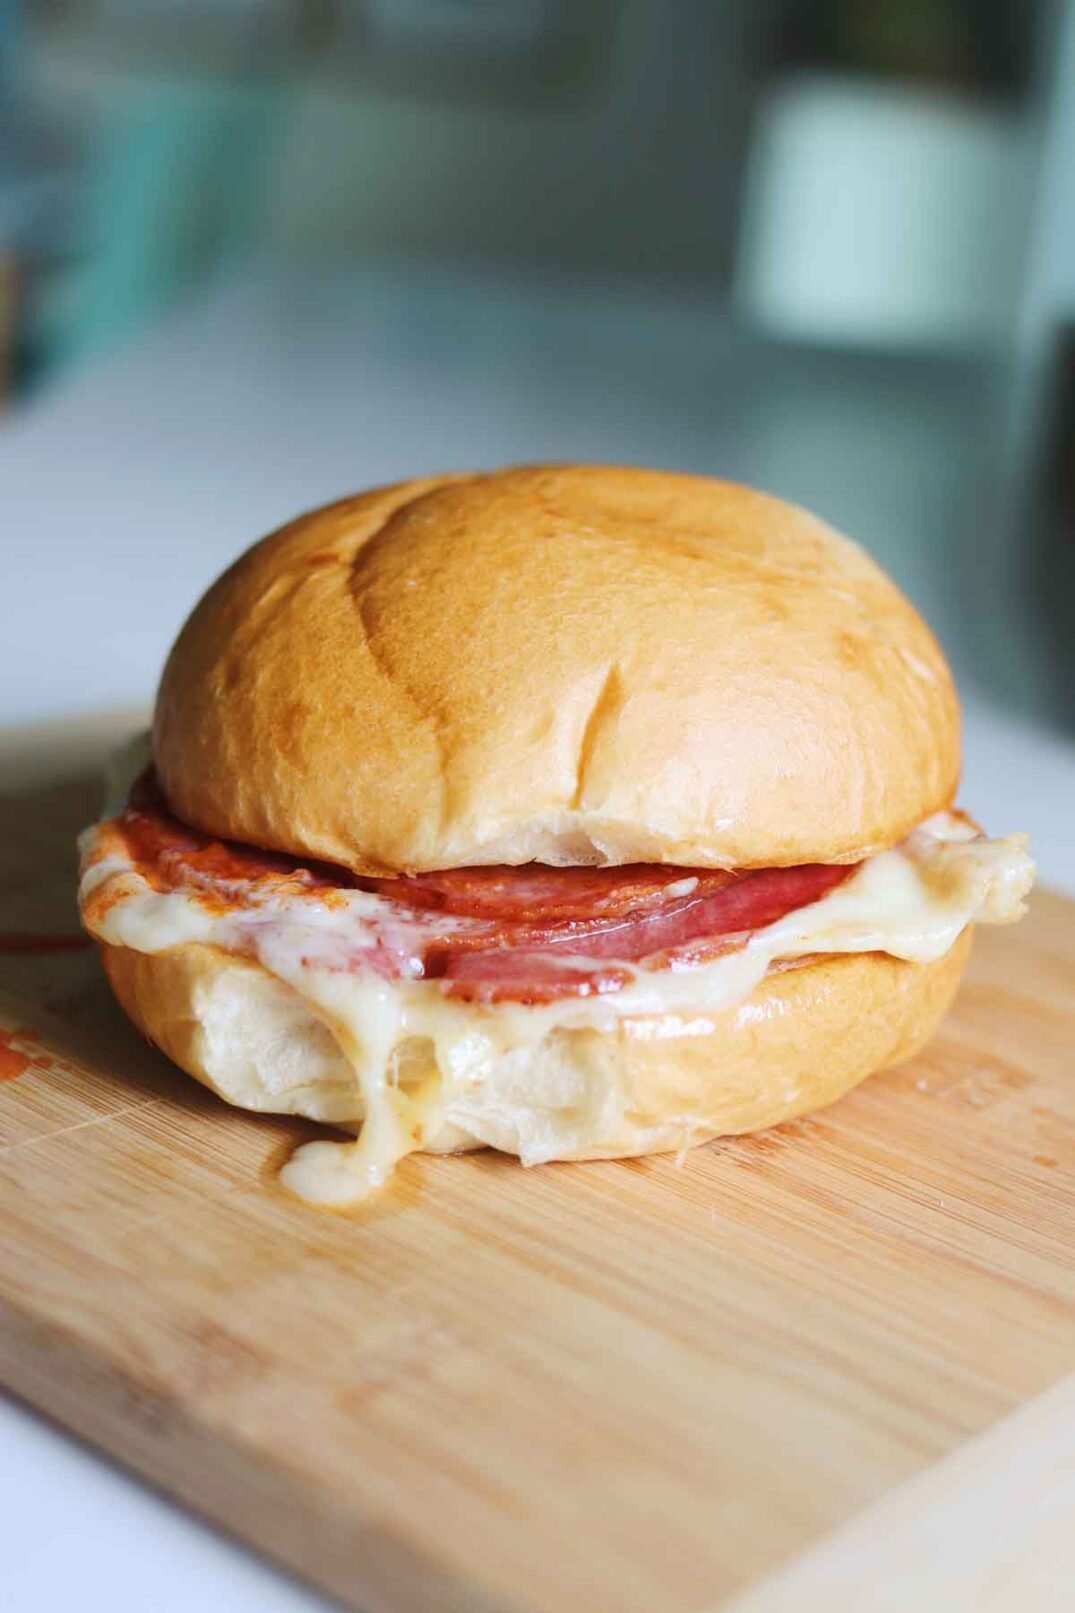 a pork roll egg and cheese sitting on a wooden cutting board with a white blurred out background.